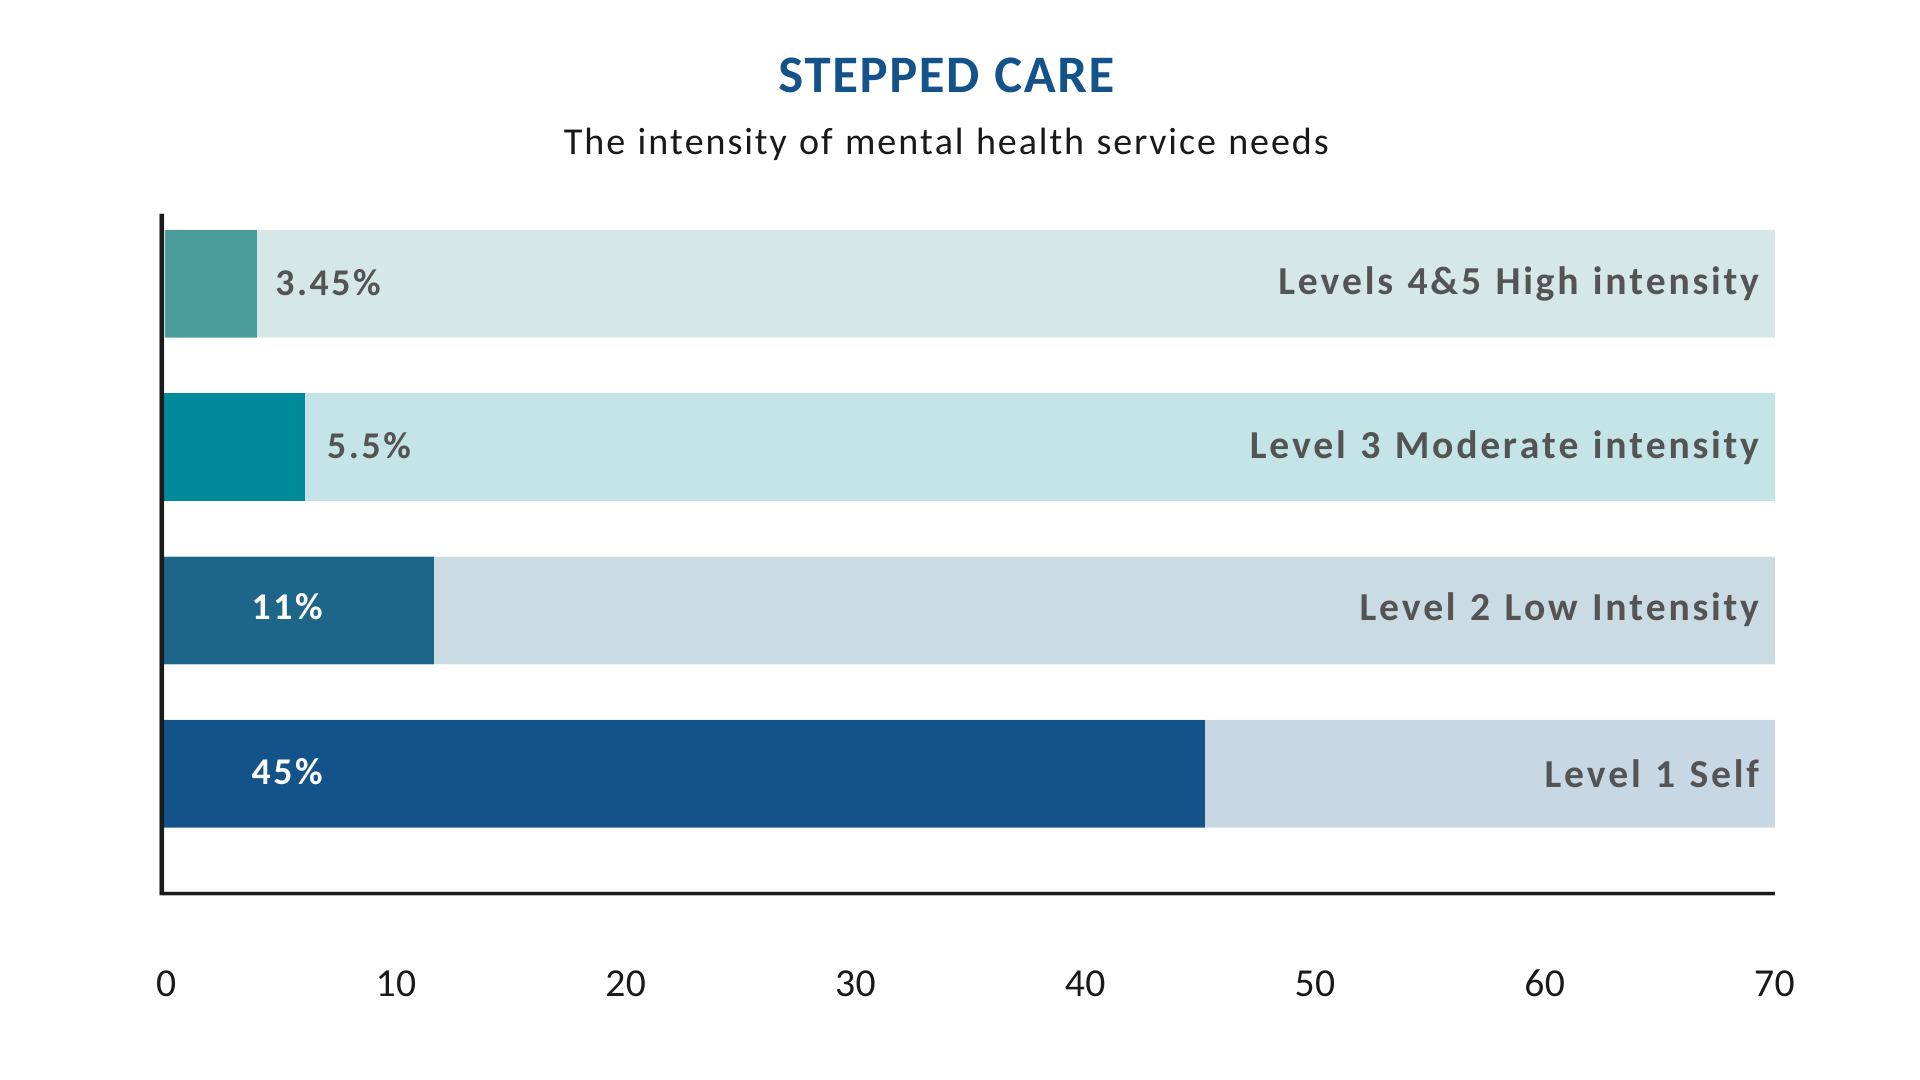 Stepped Care: The intensity of Mental Health Service Needs. 3.5% Levels 4 and 5 High Intensity. 5.5% Level 3 Moderate Intensity. 11% Level 2 Low Intensity. 45% Level 1 Self